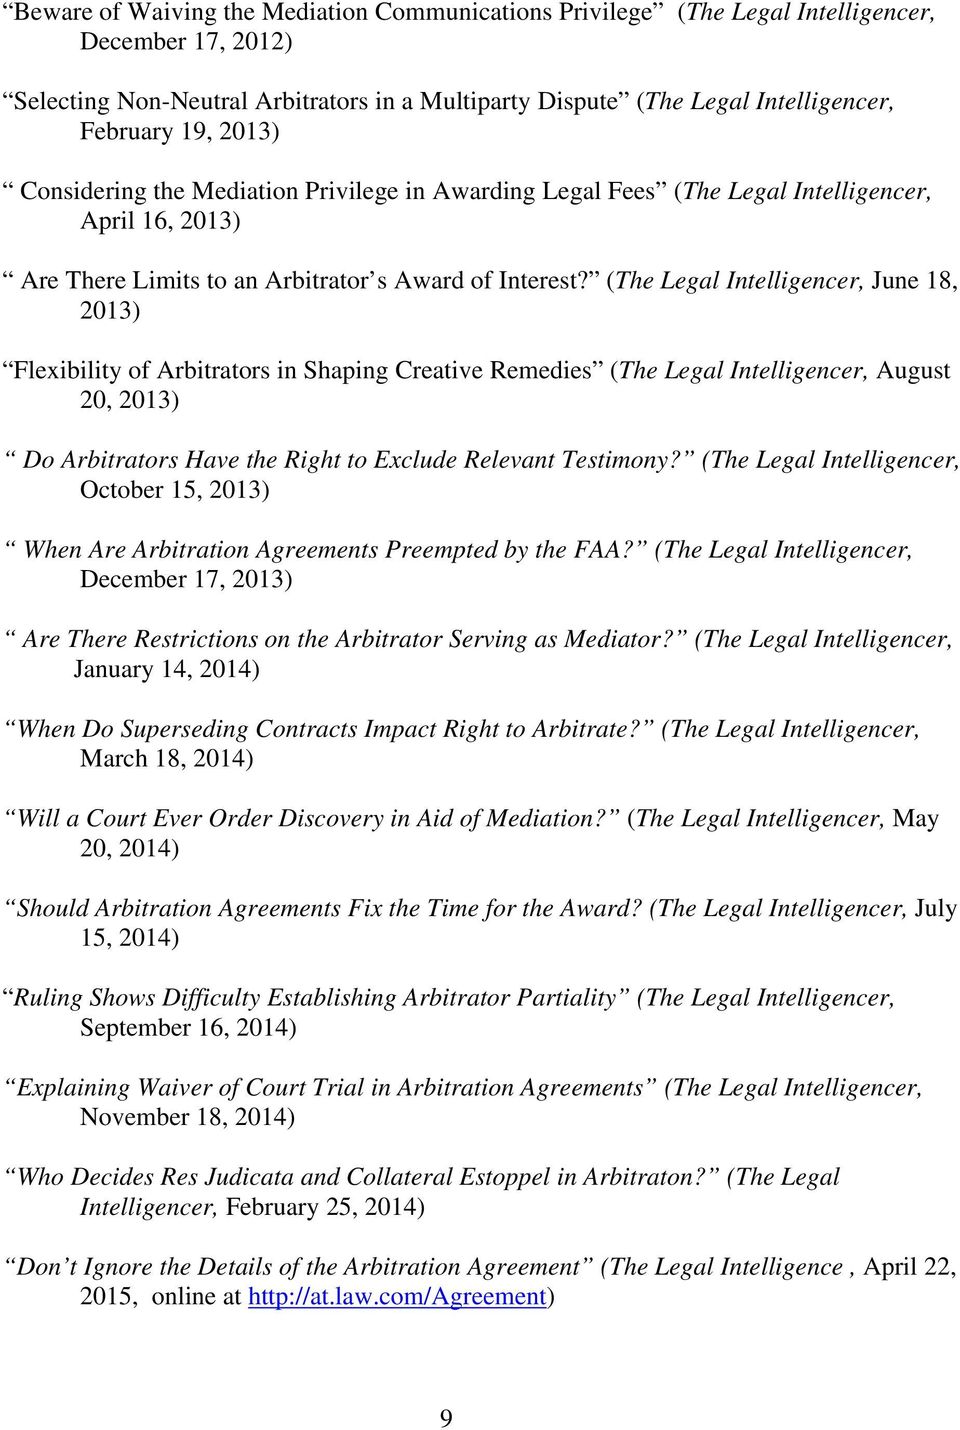 (The Legal Intelligencer, June 18, 2013) Flexibility of Arbitrators in Shaping Creative Remedies (The Legal Intelligencer, August 20, 2013) Do Arbitrators Have the Right to Exclude Relevant Testimony?